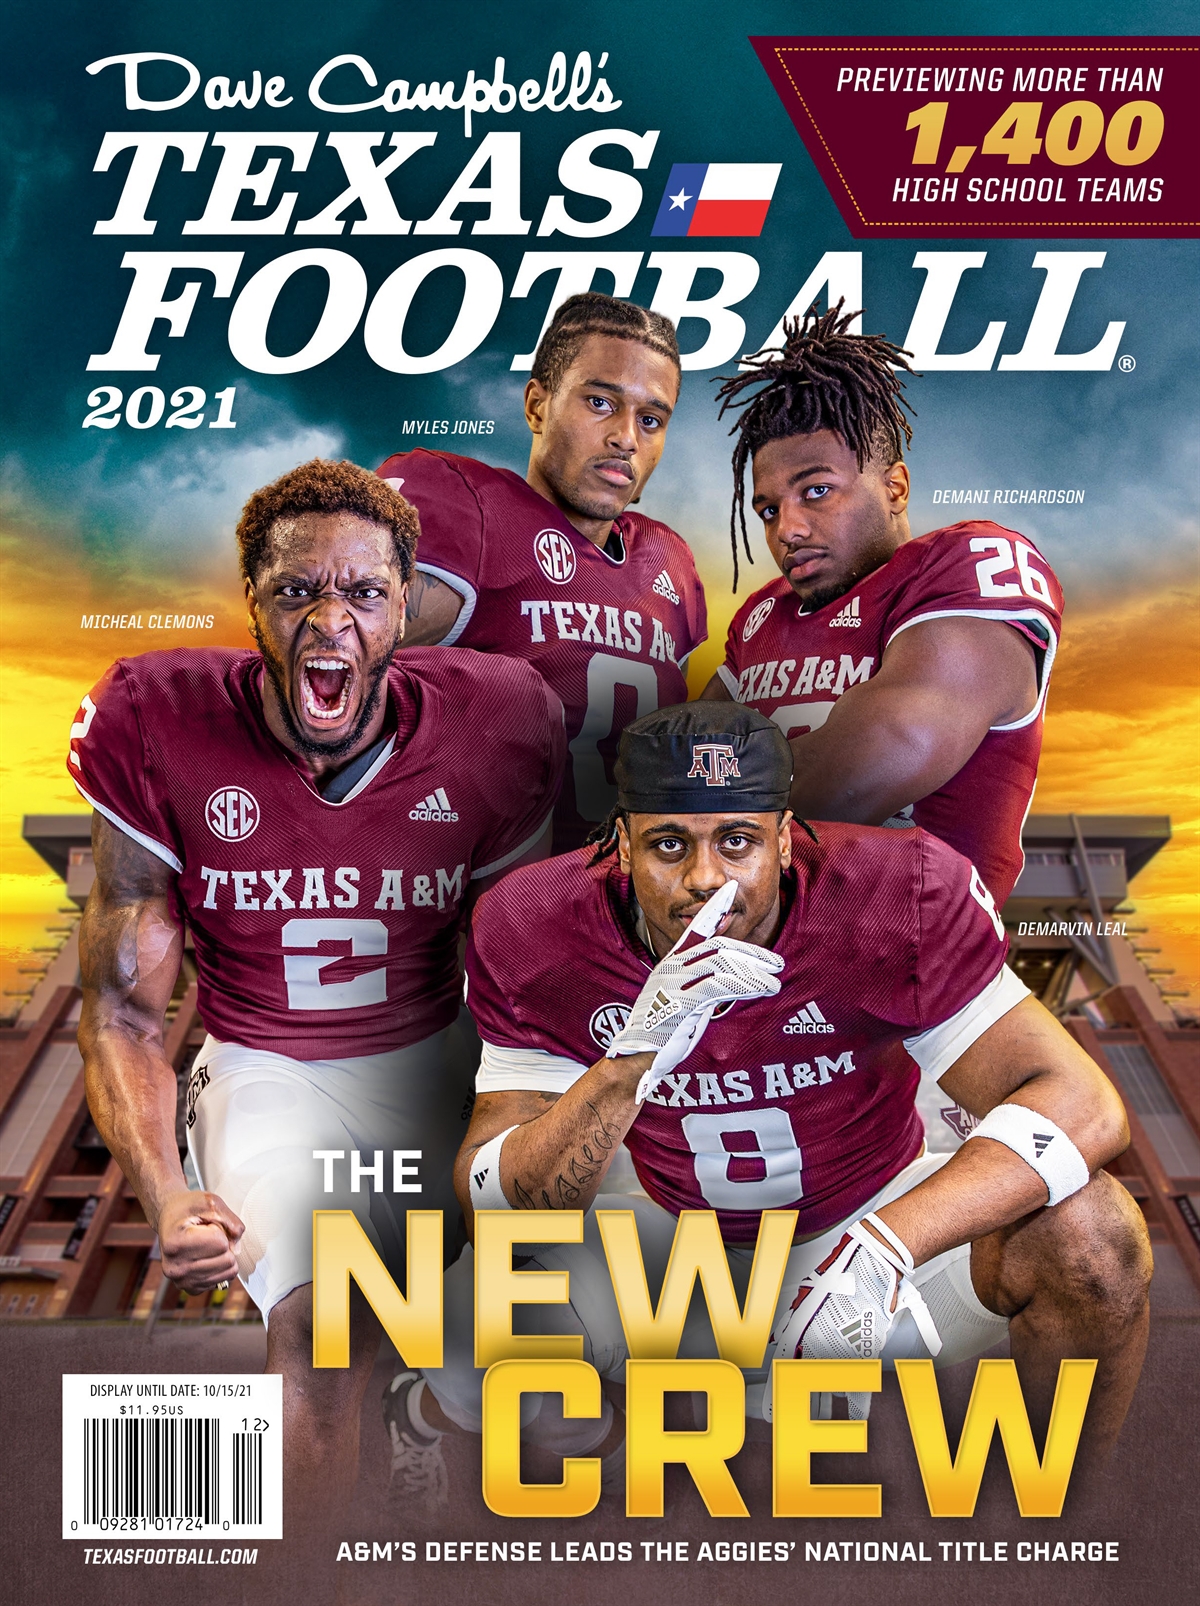 MAIN COVER REVEAL 62nd Edition Dave Campbell's Texas Football